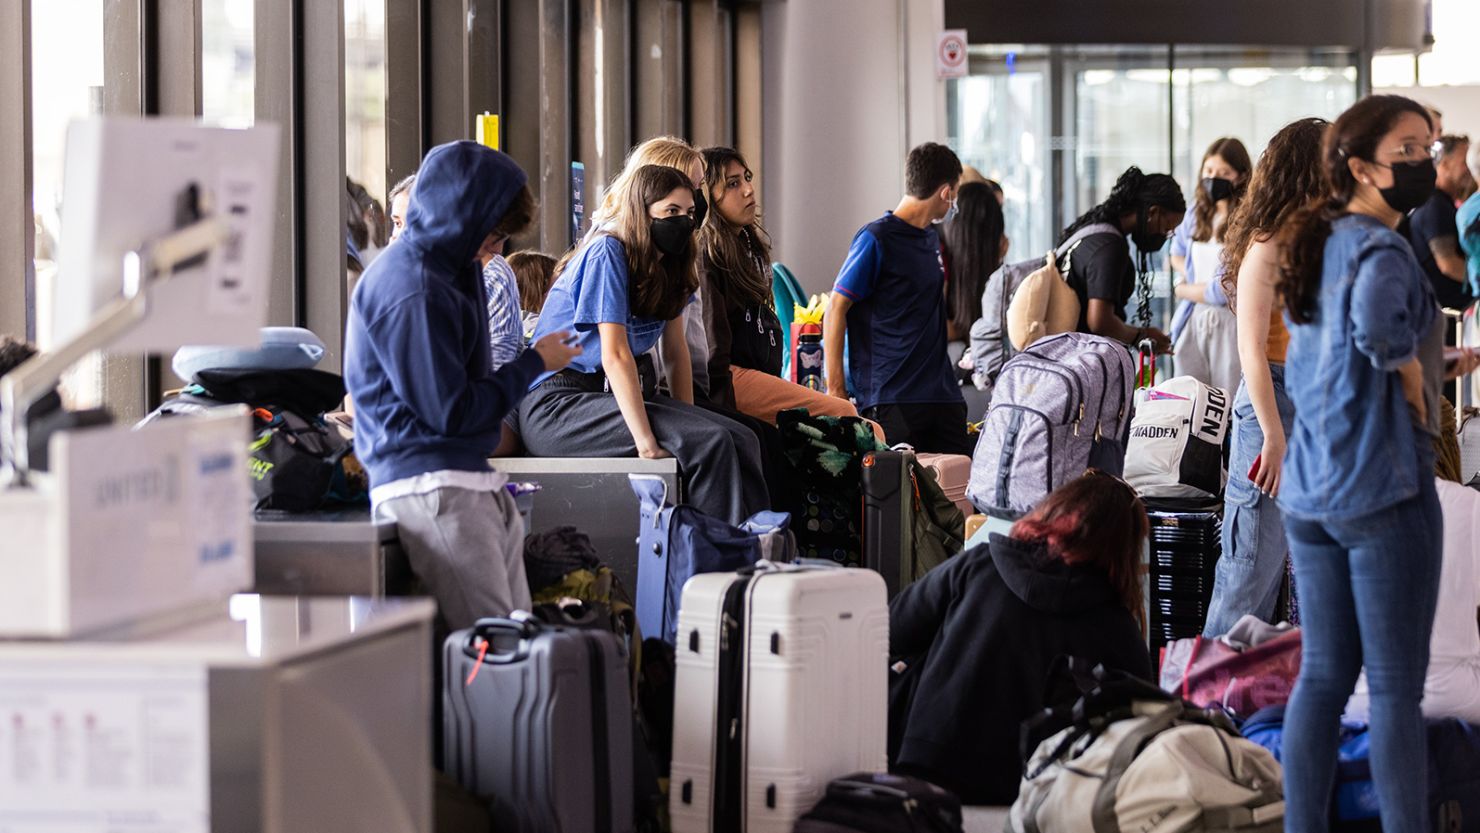 NEWARK, NJ - JULY 01: Travelers wait at Newark Liberty International Airport (EWR) on July 1, 2022 in Newark, New Jersey. Hundreds of flights were canceled across the US ahead of July Fourth weekend. (Photo by Jeenah Moon/Getty Images)